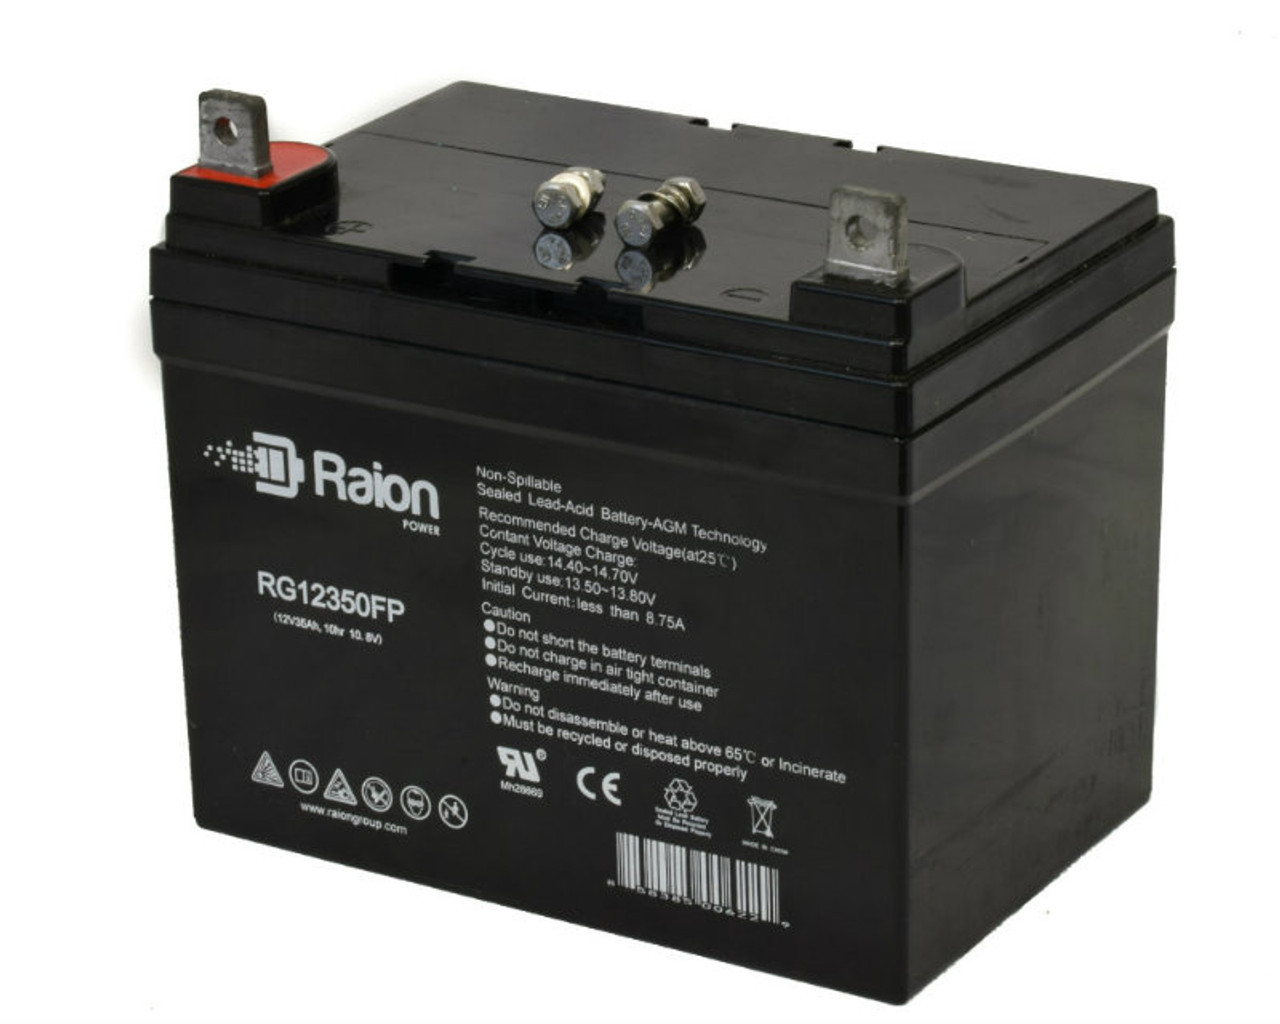 Raion Power Replacement 12V 35Ah RG12350FP Mobility Scooter Battery for Electric Mobility Rascal 205